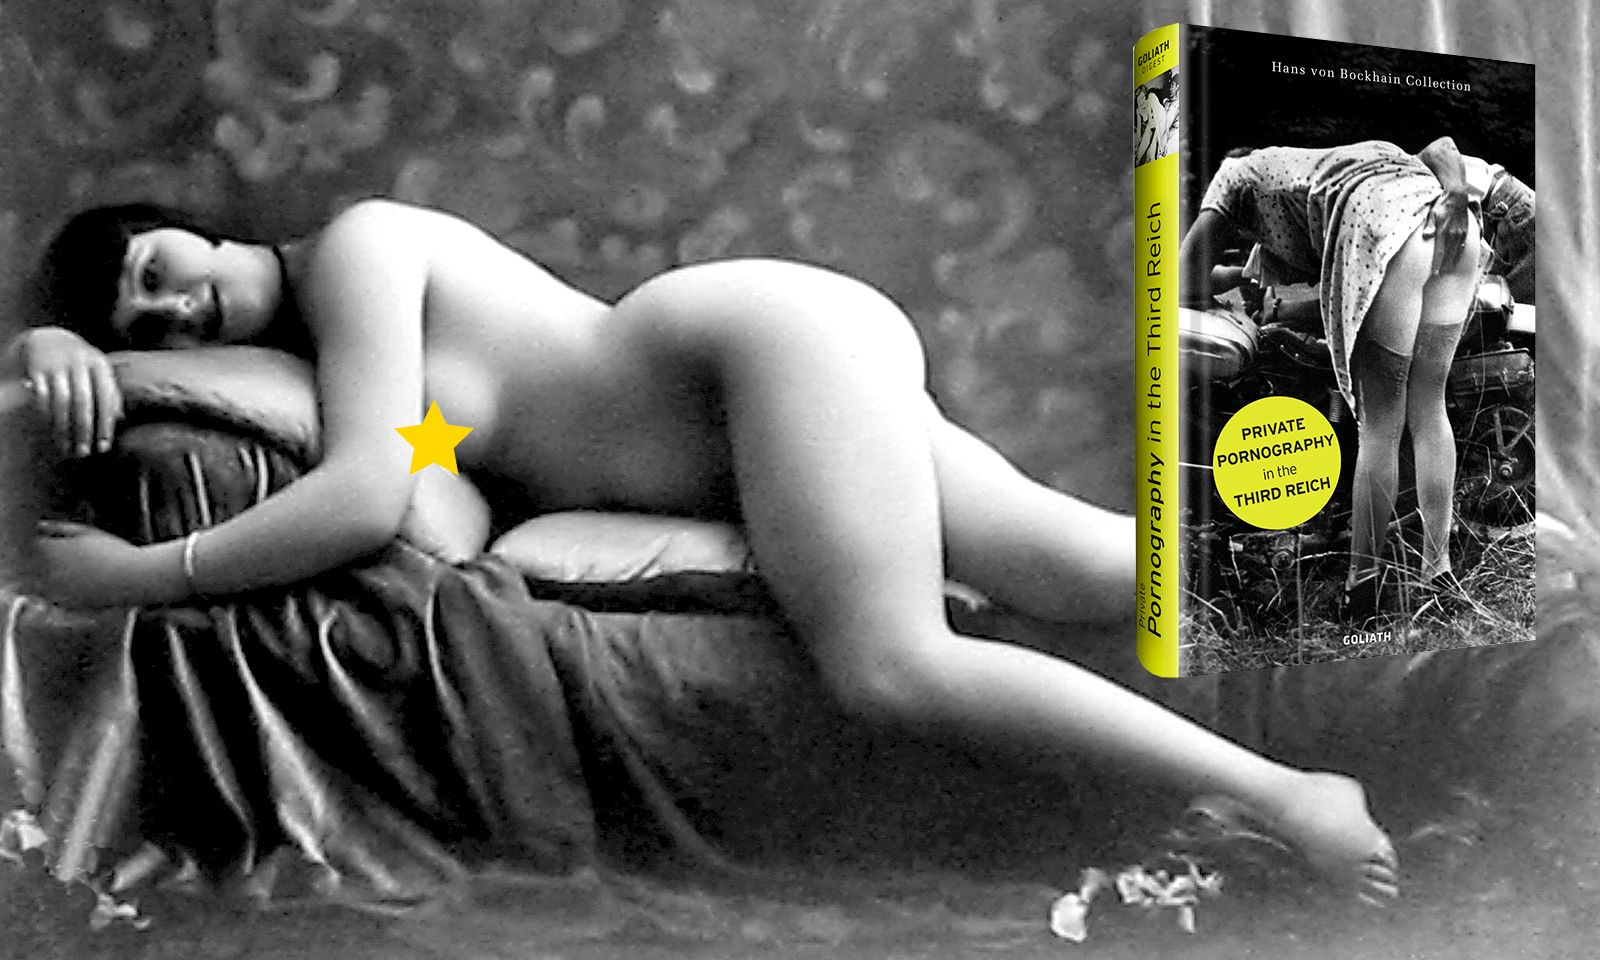 Ever Wondered What Nazi Porn Looked Like? New Book Shows It All